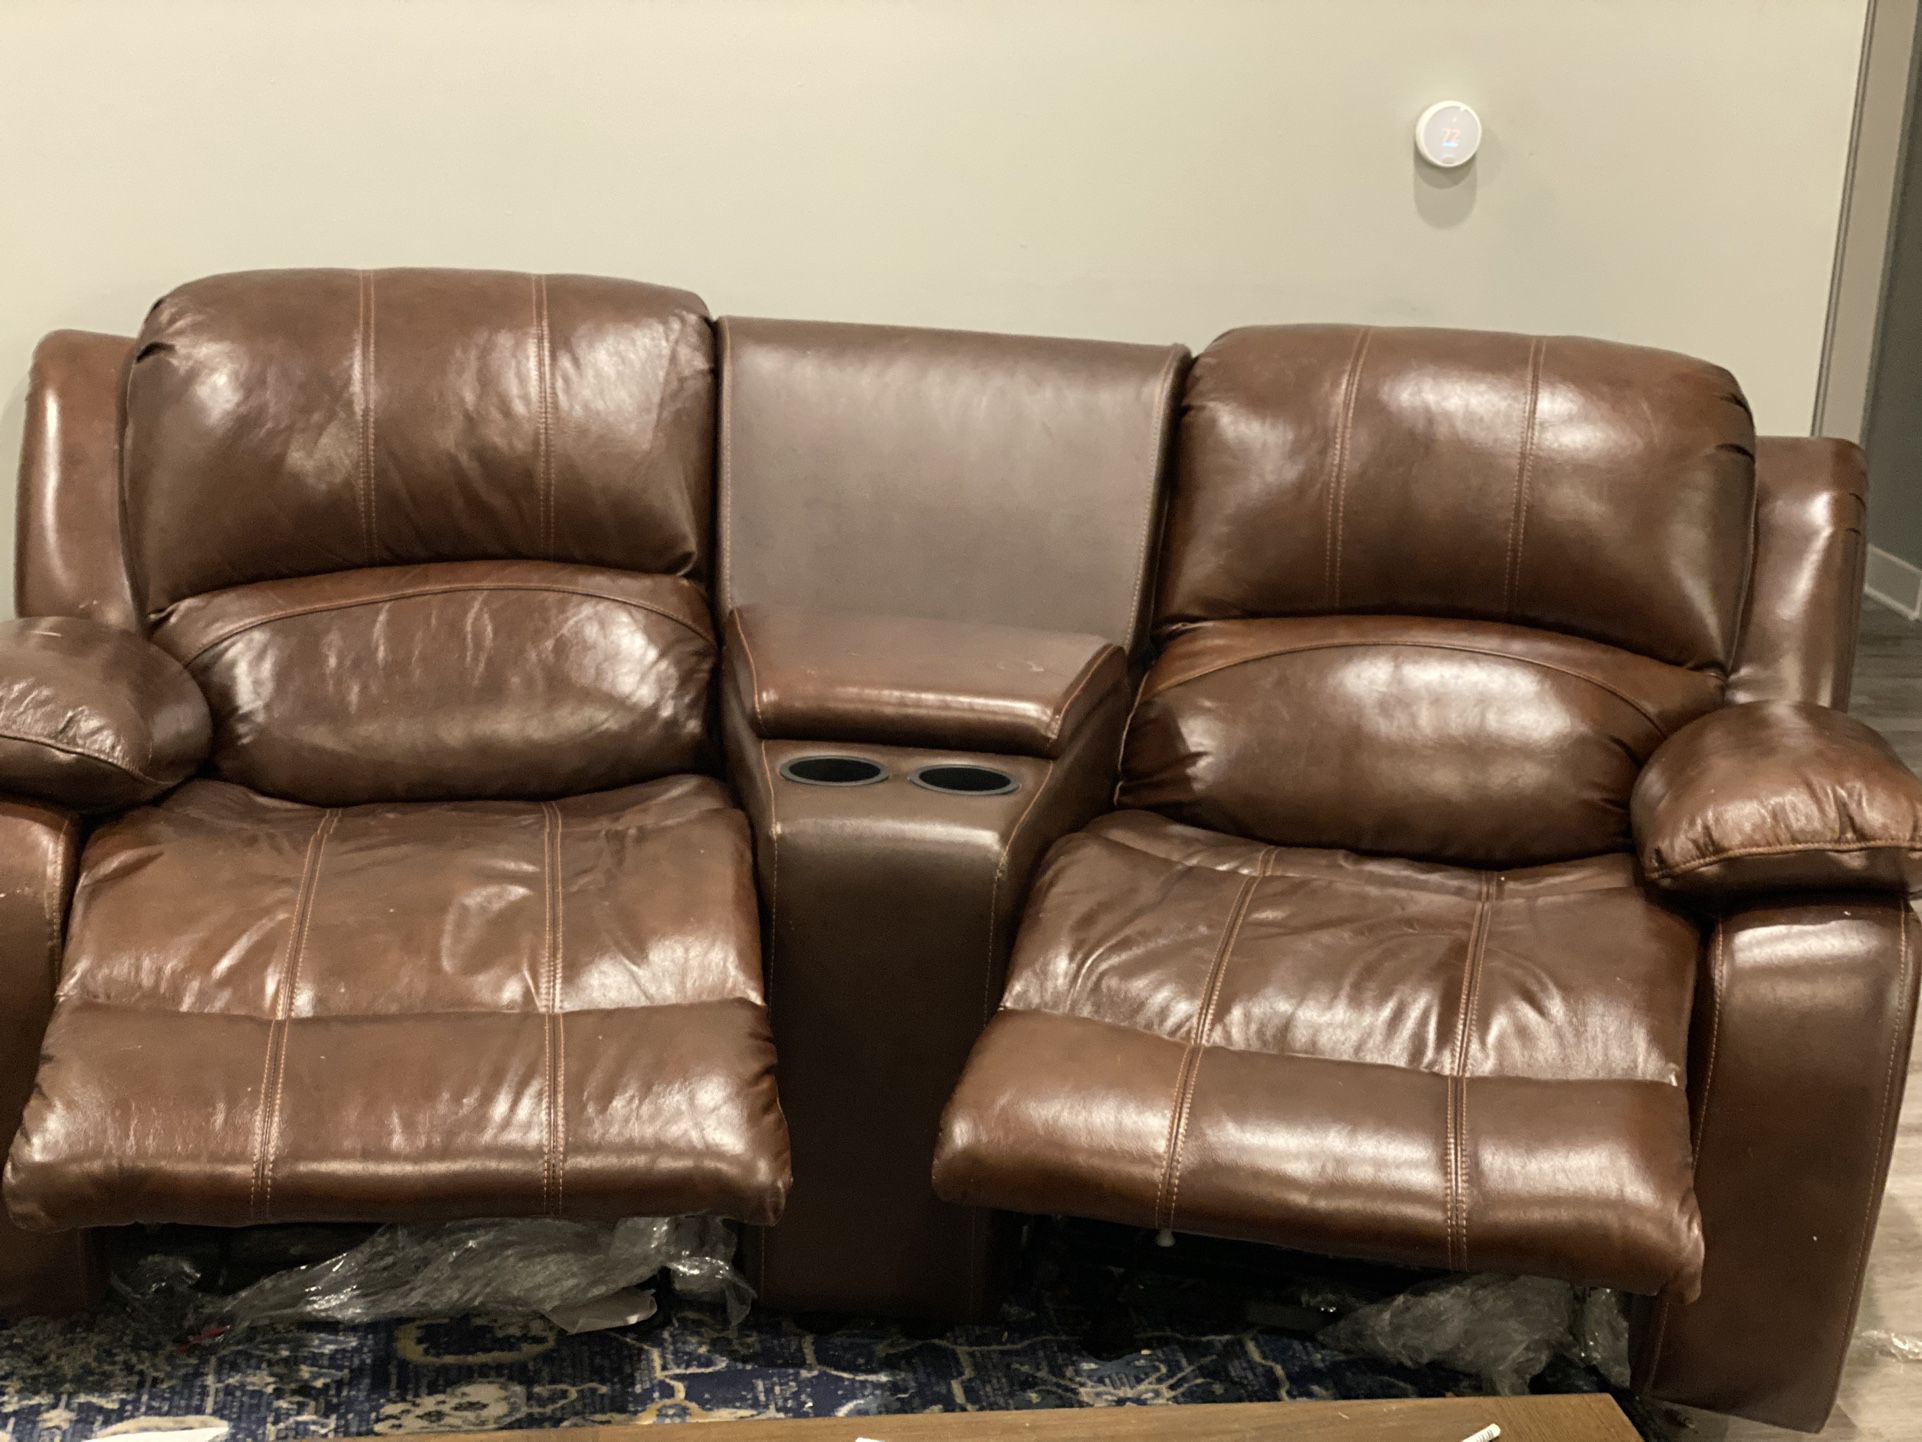 70” Wide Modern Breathable Leather Manual Reclining Loveseat with Cup Holders  Pickup location- Cary NC  CASH Only 